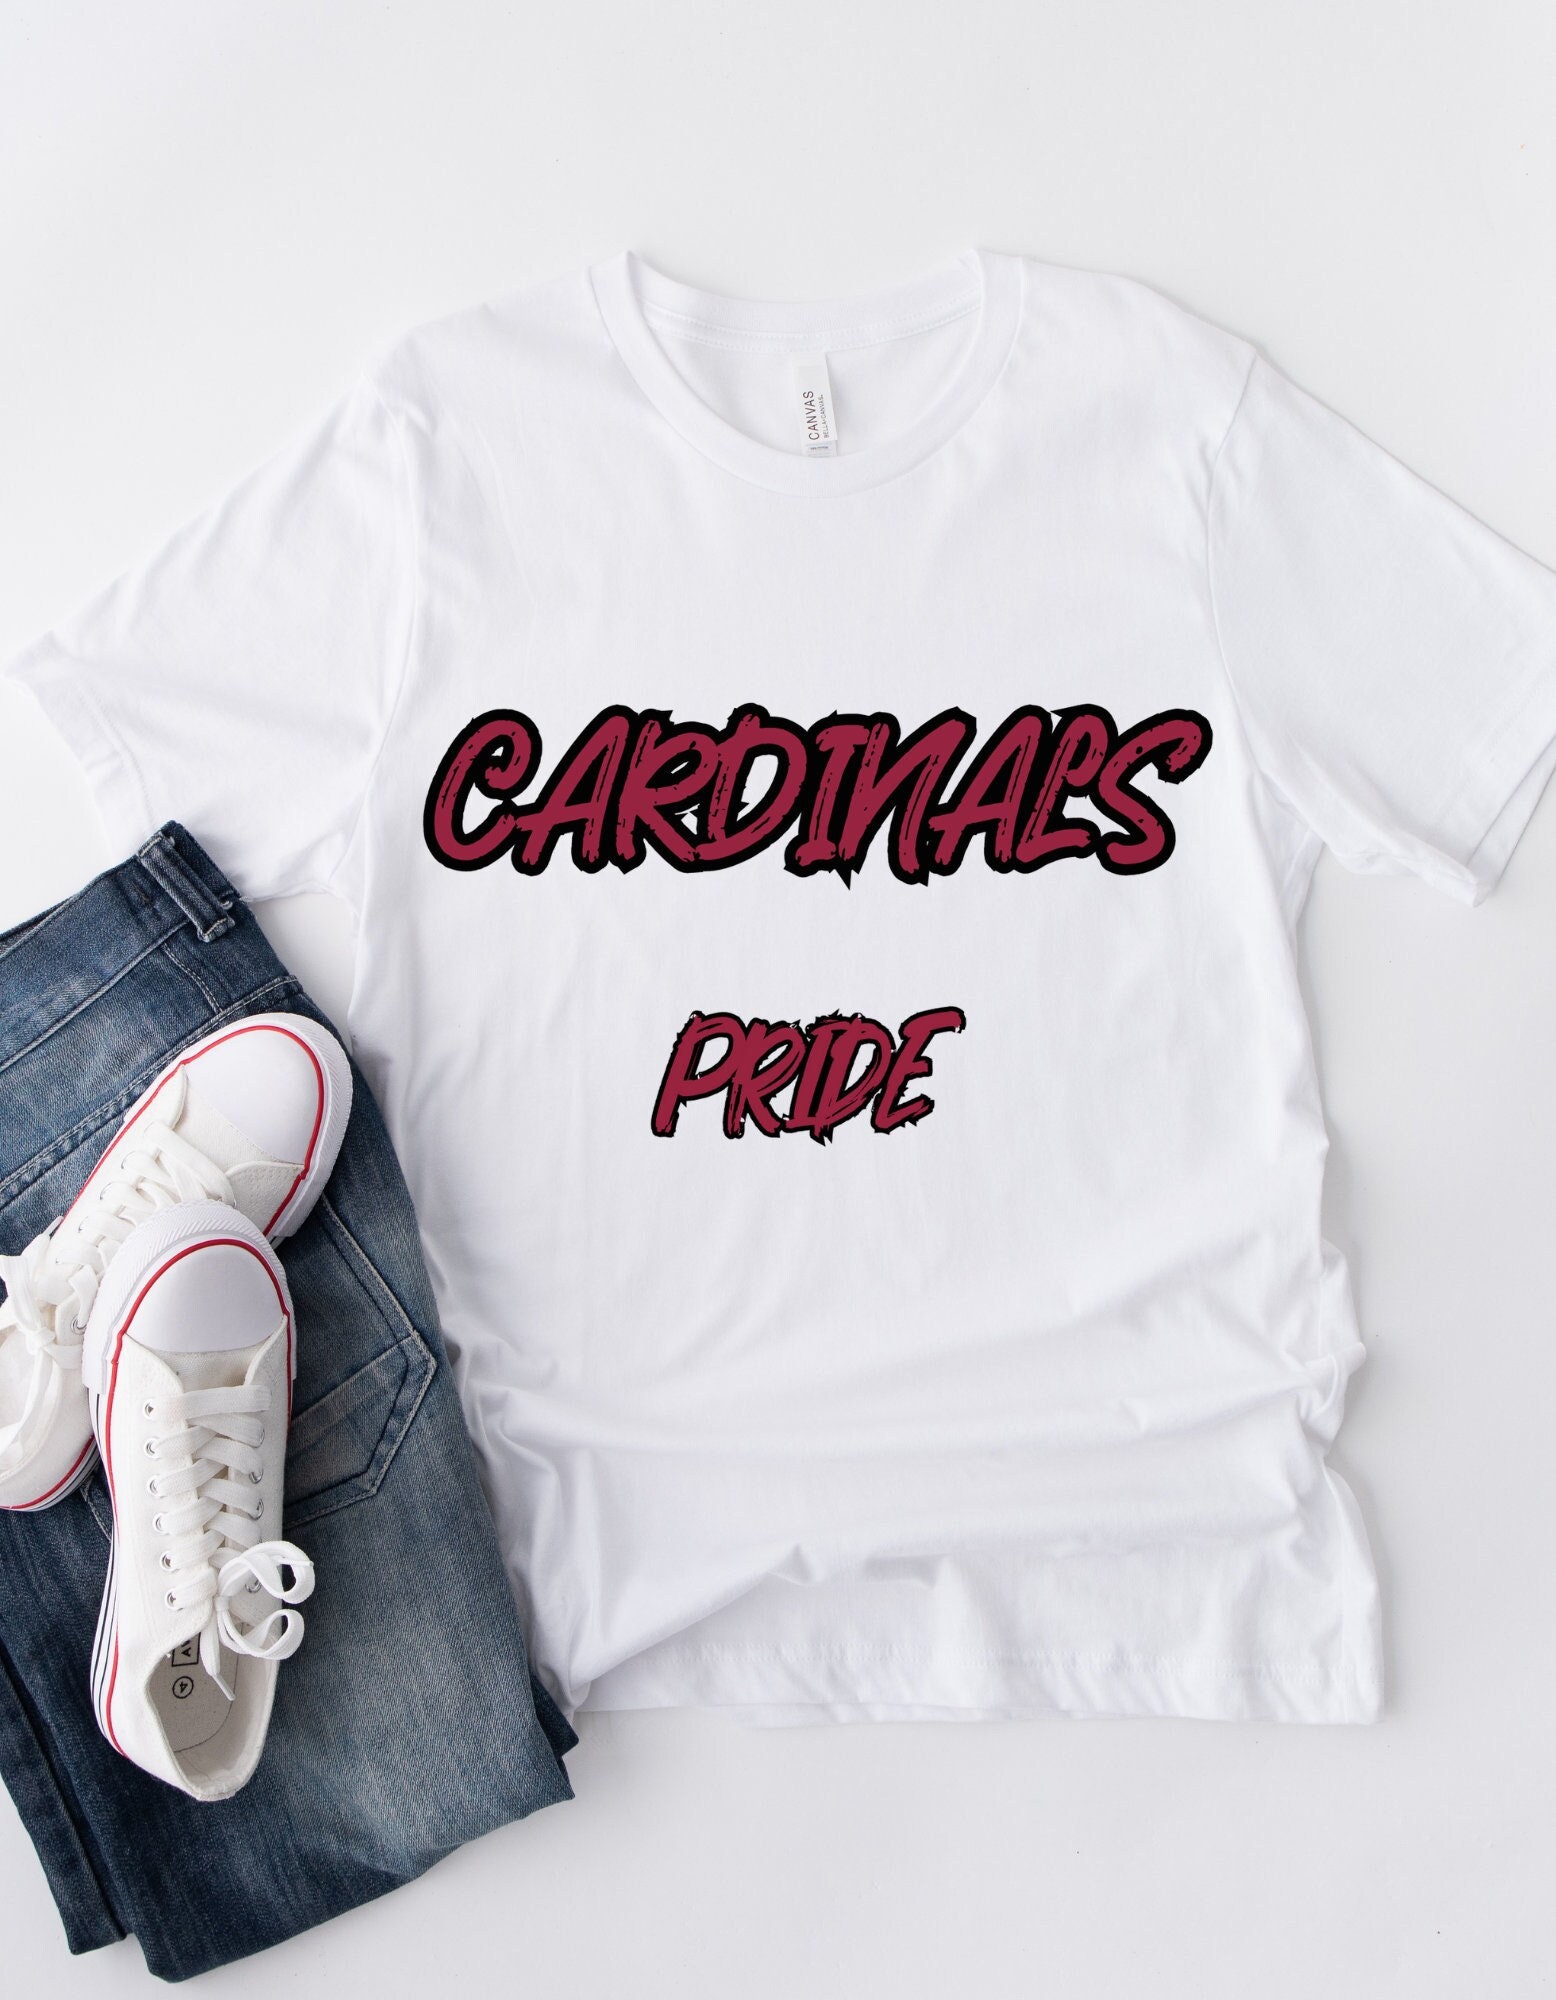 theeGOATapparel Cardinals Pridegreat Gift for Father's Day, Great Gift for Him, Great Gift for Her, Pride, Short-sleeved T-Shirt